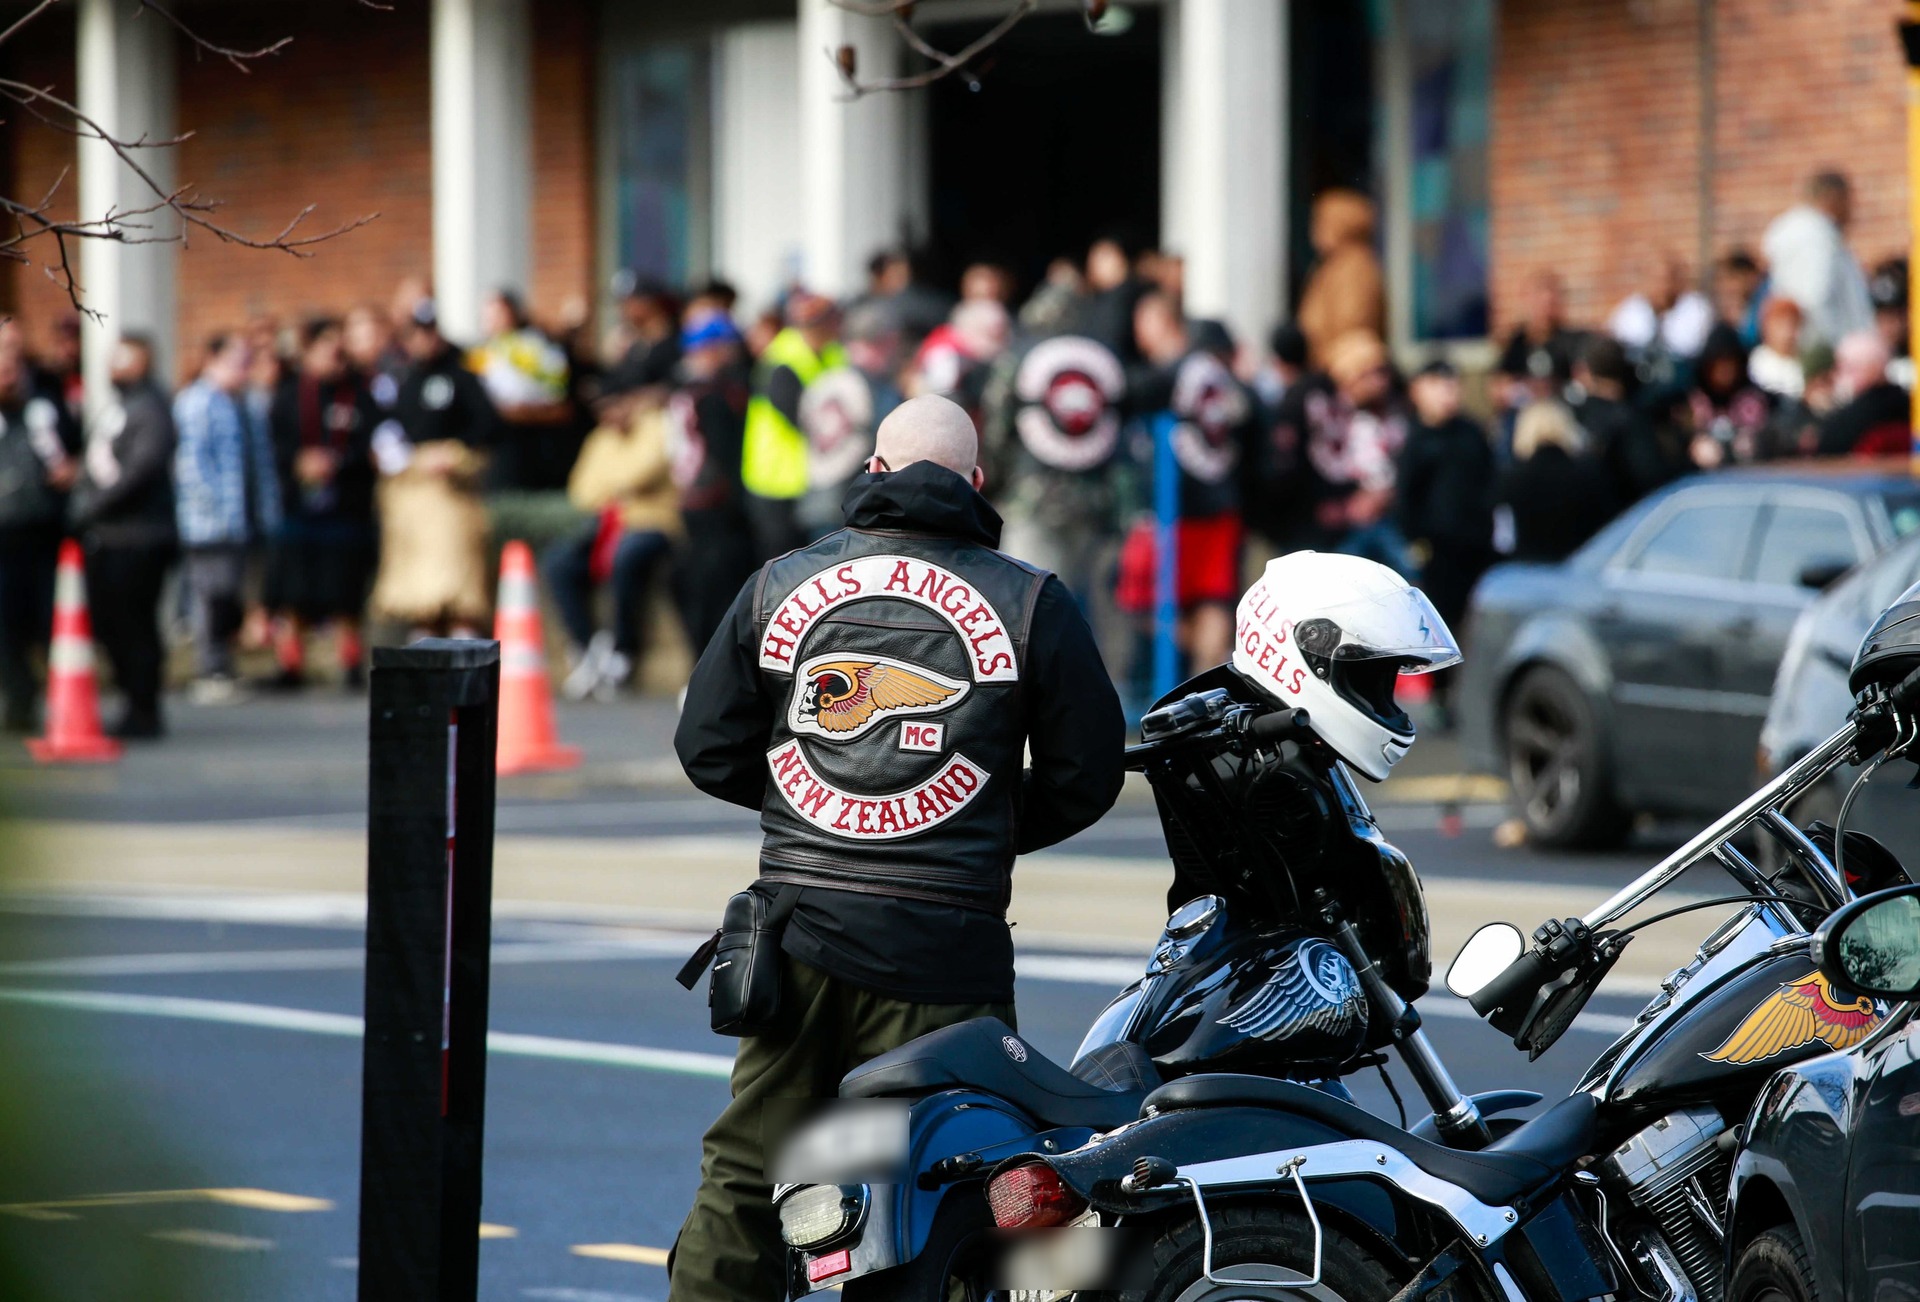 Hells Angels founder and figurehead Sonny Barger dies - NZ Herald